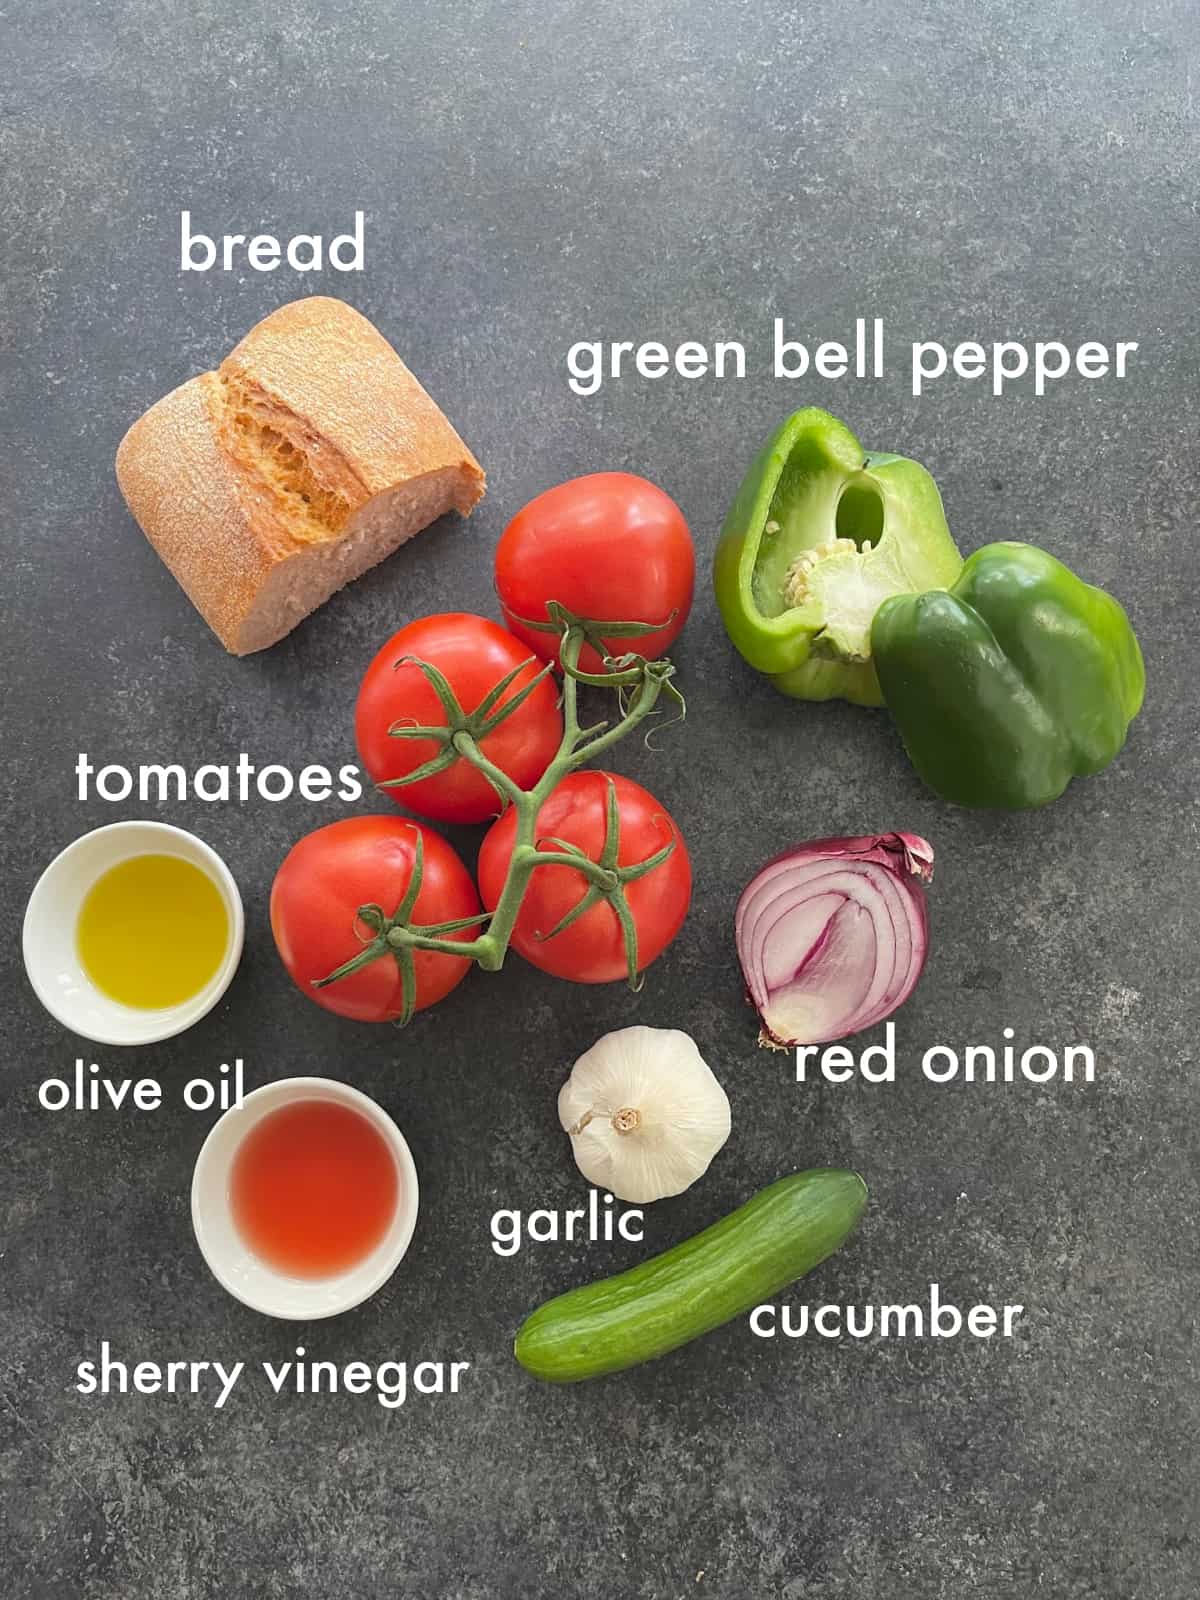 To make this recipe you need bread, tomatoes, green bell peppers, olive oil, sherry vinegar, cucumber, onion and garlic. 